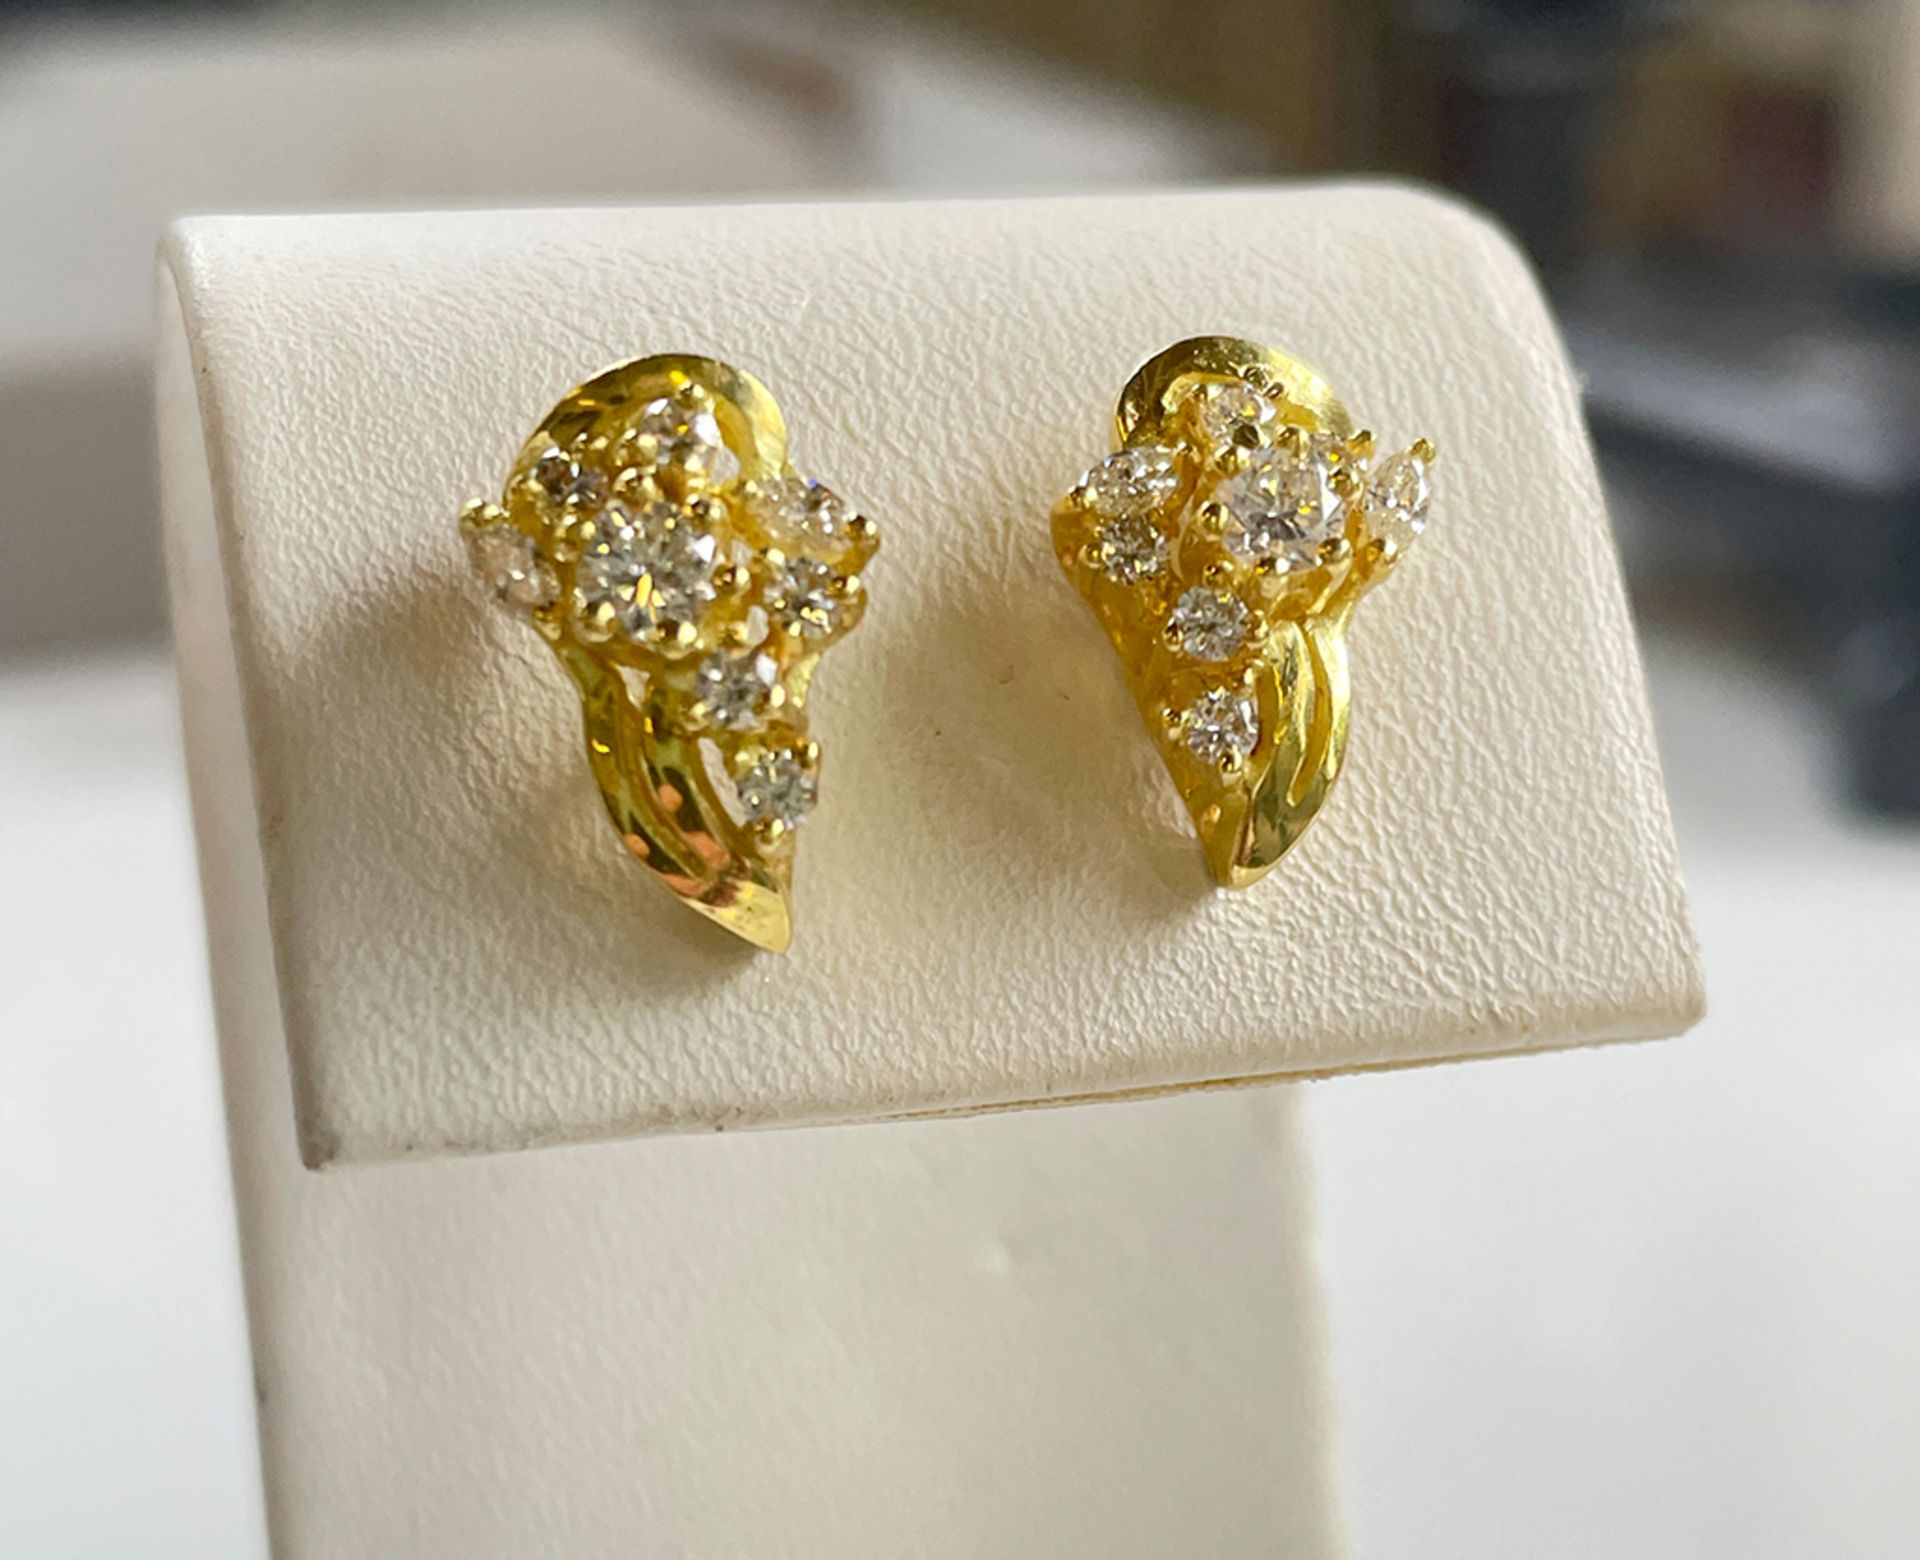 Earrings | Ear Studs 18K Gold with ca. 1ct diamonds / brilliants - Image 2 of 4